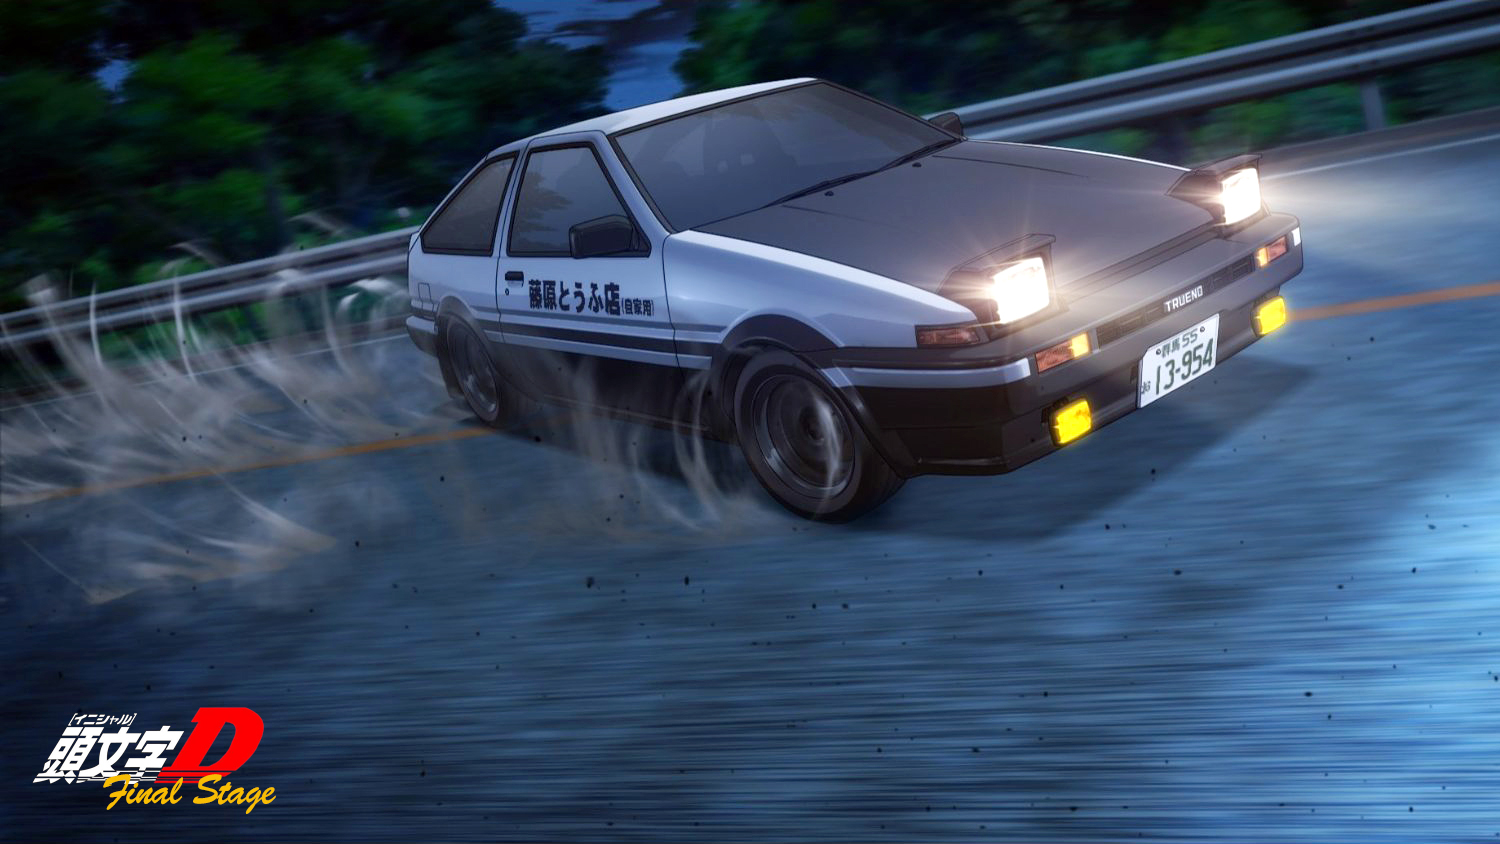 Initial D World - Discussion Board / Forums > Initial D Final Stage to release on 2014 ...